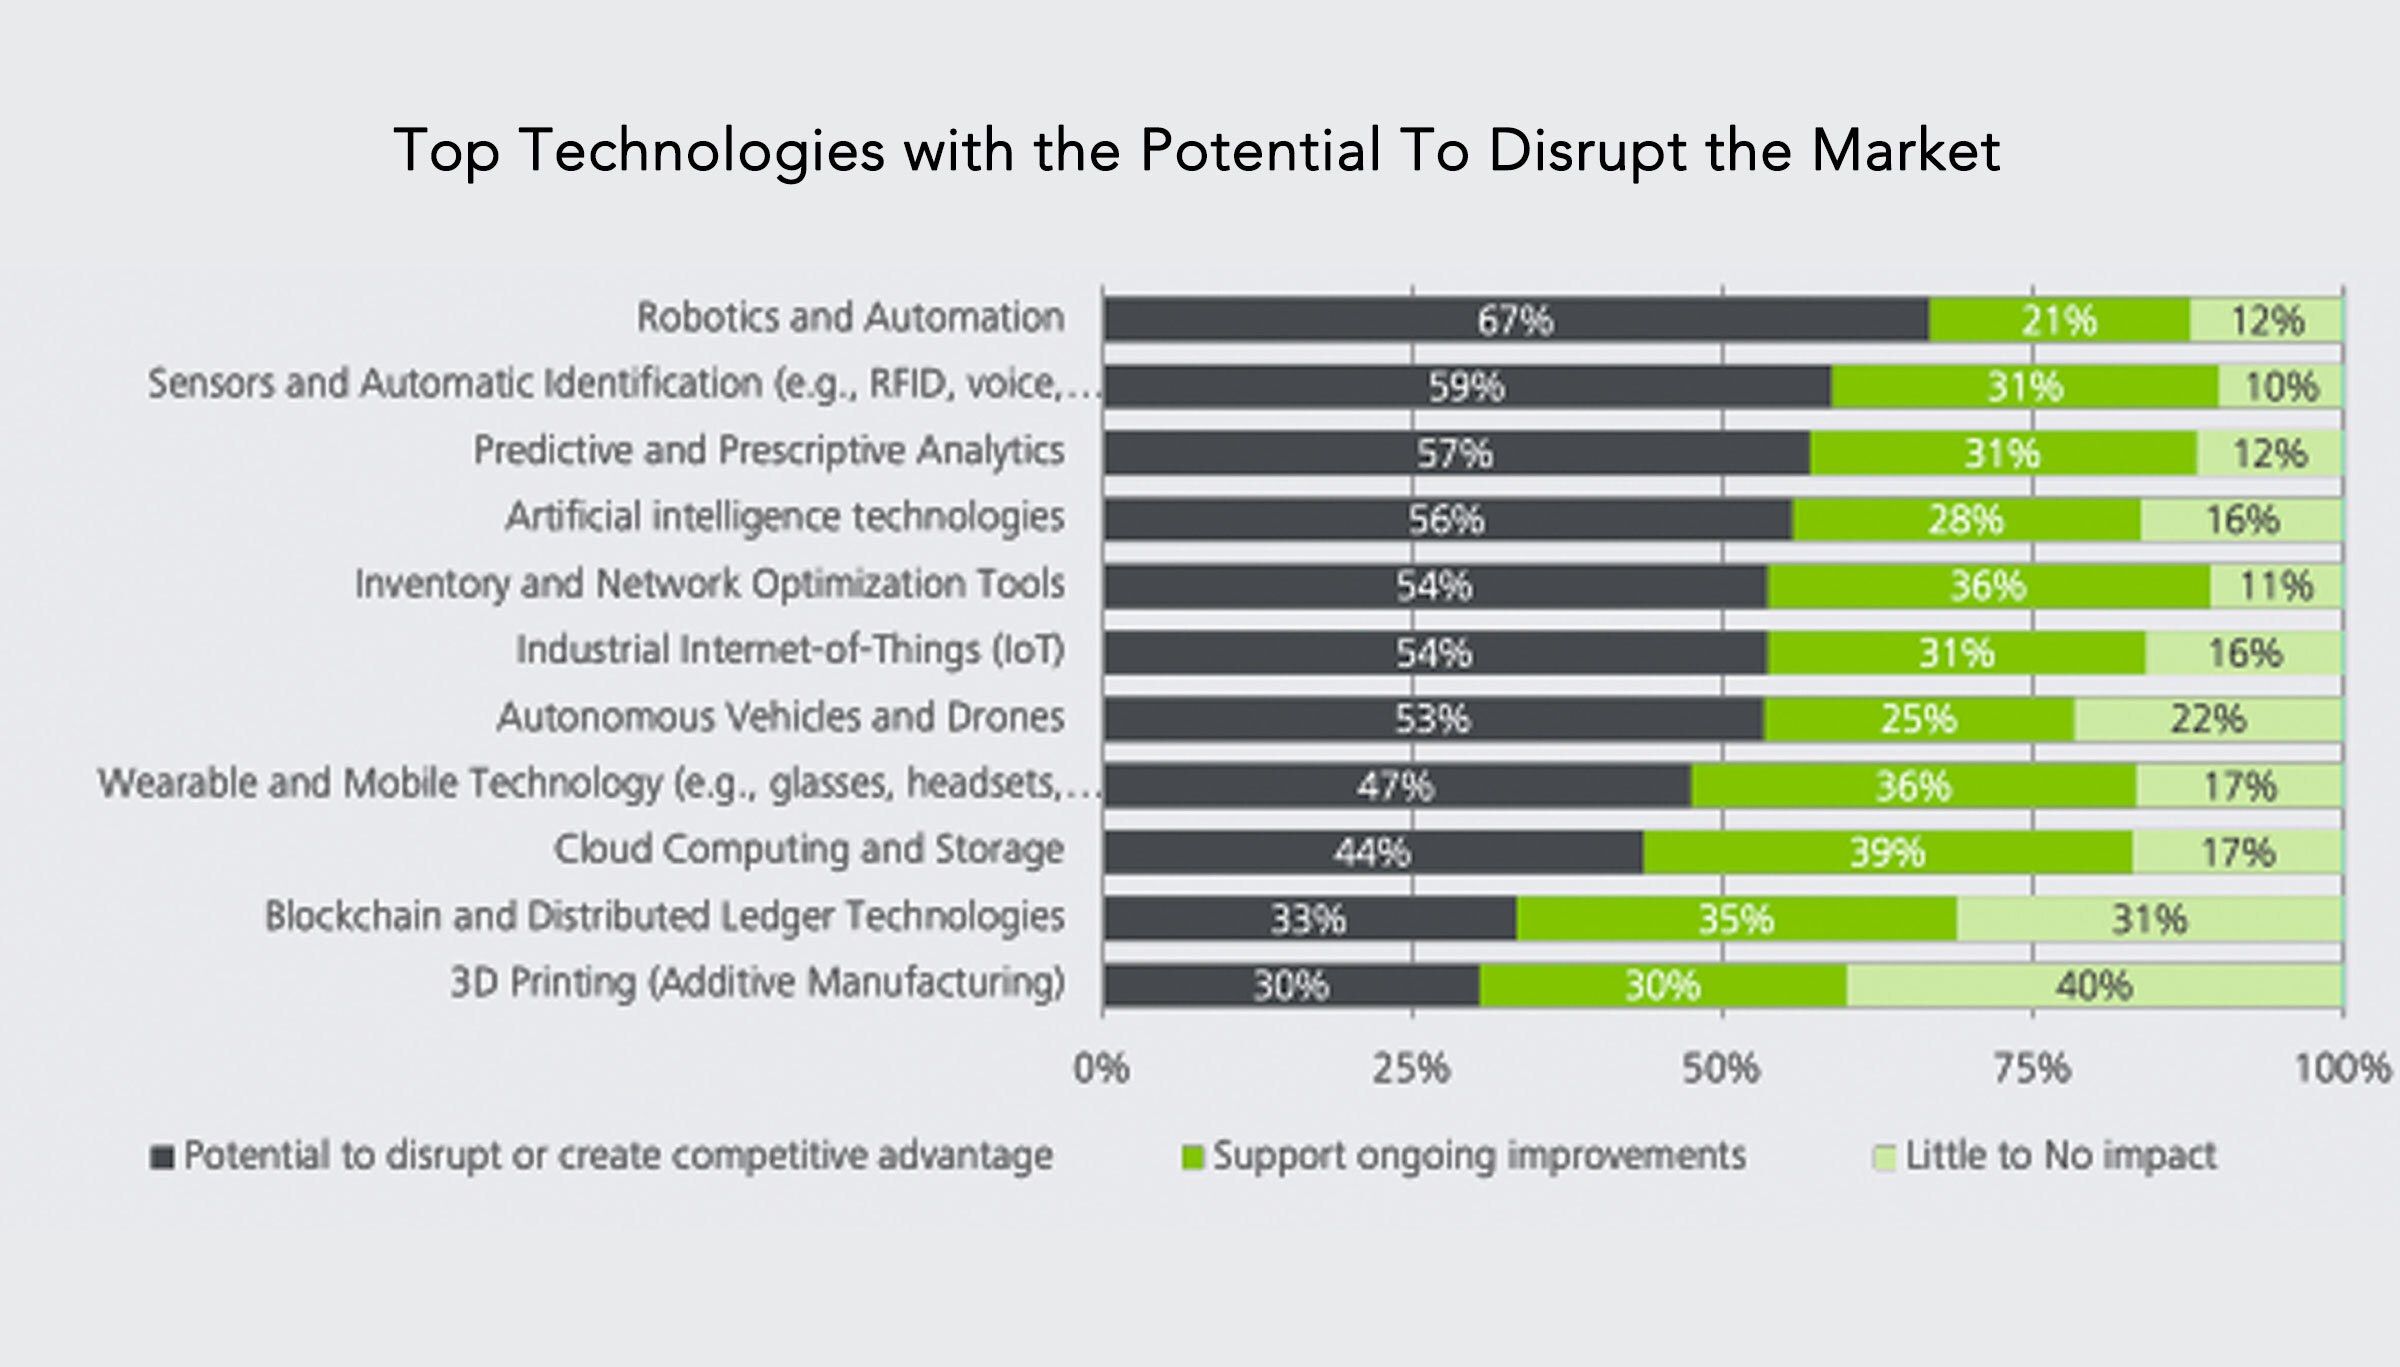 Chart 4: The top three technologies with the potential to disrupt the market or create a competitive advantage include robotics and automation, sensors and automatic identification, and predictive and prescriptive analytics.